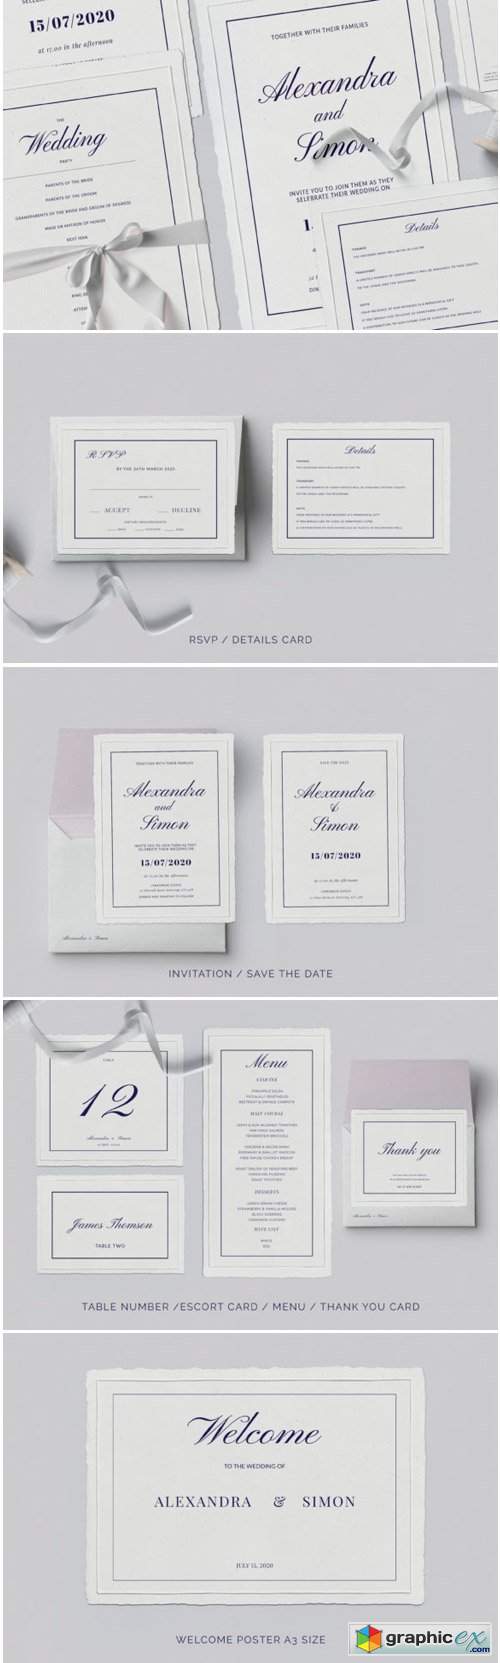 This is an Invitation Wedding Template Suite